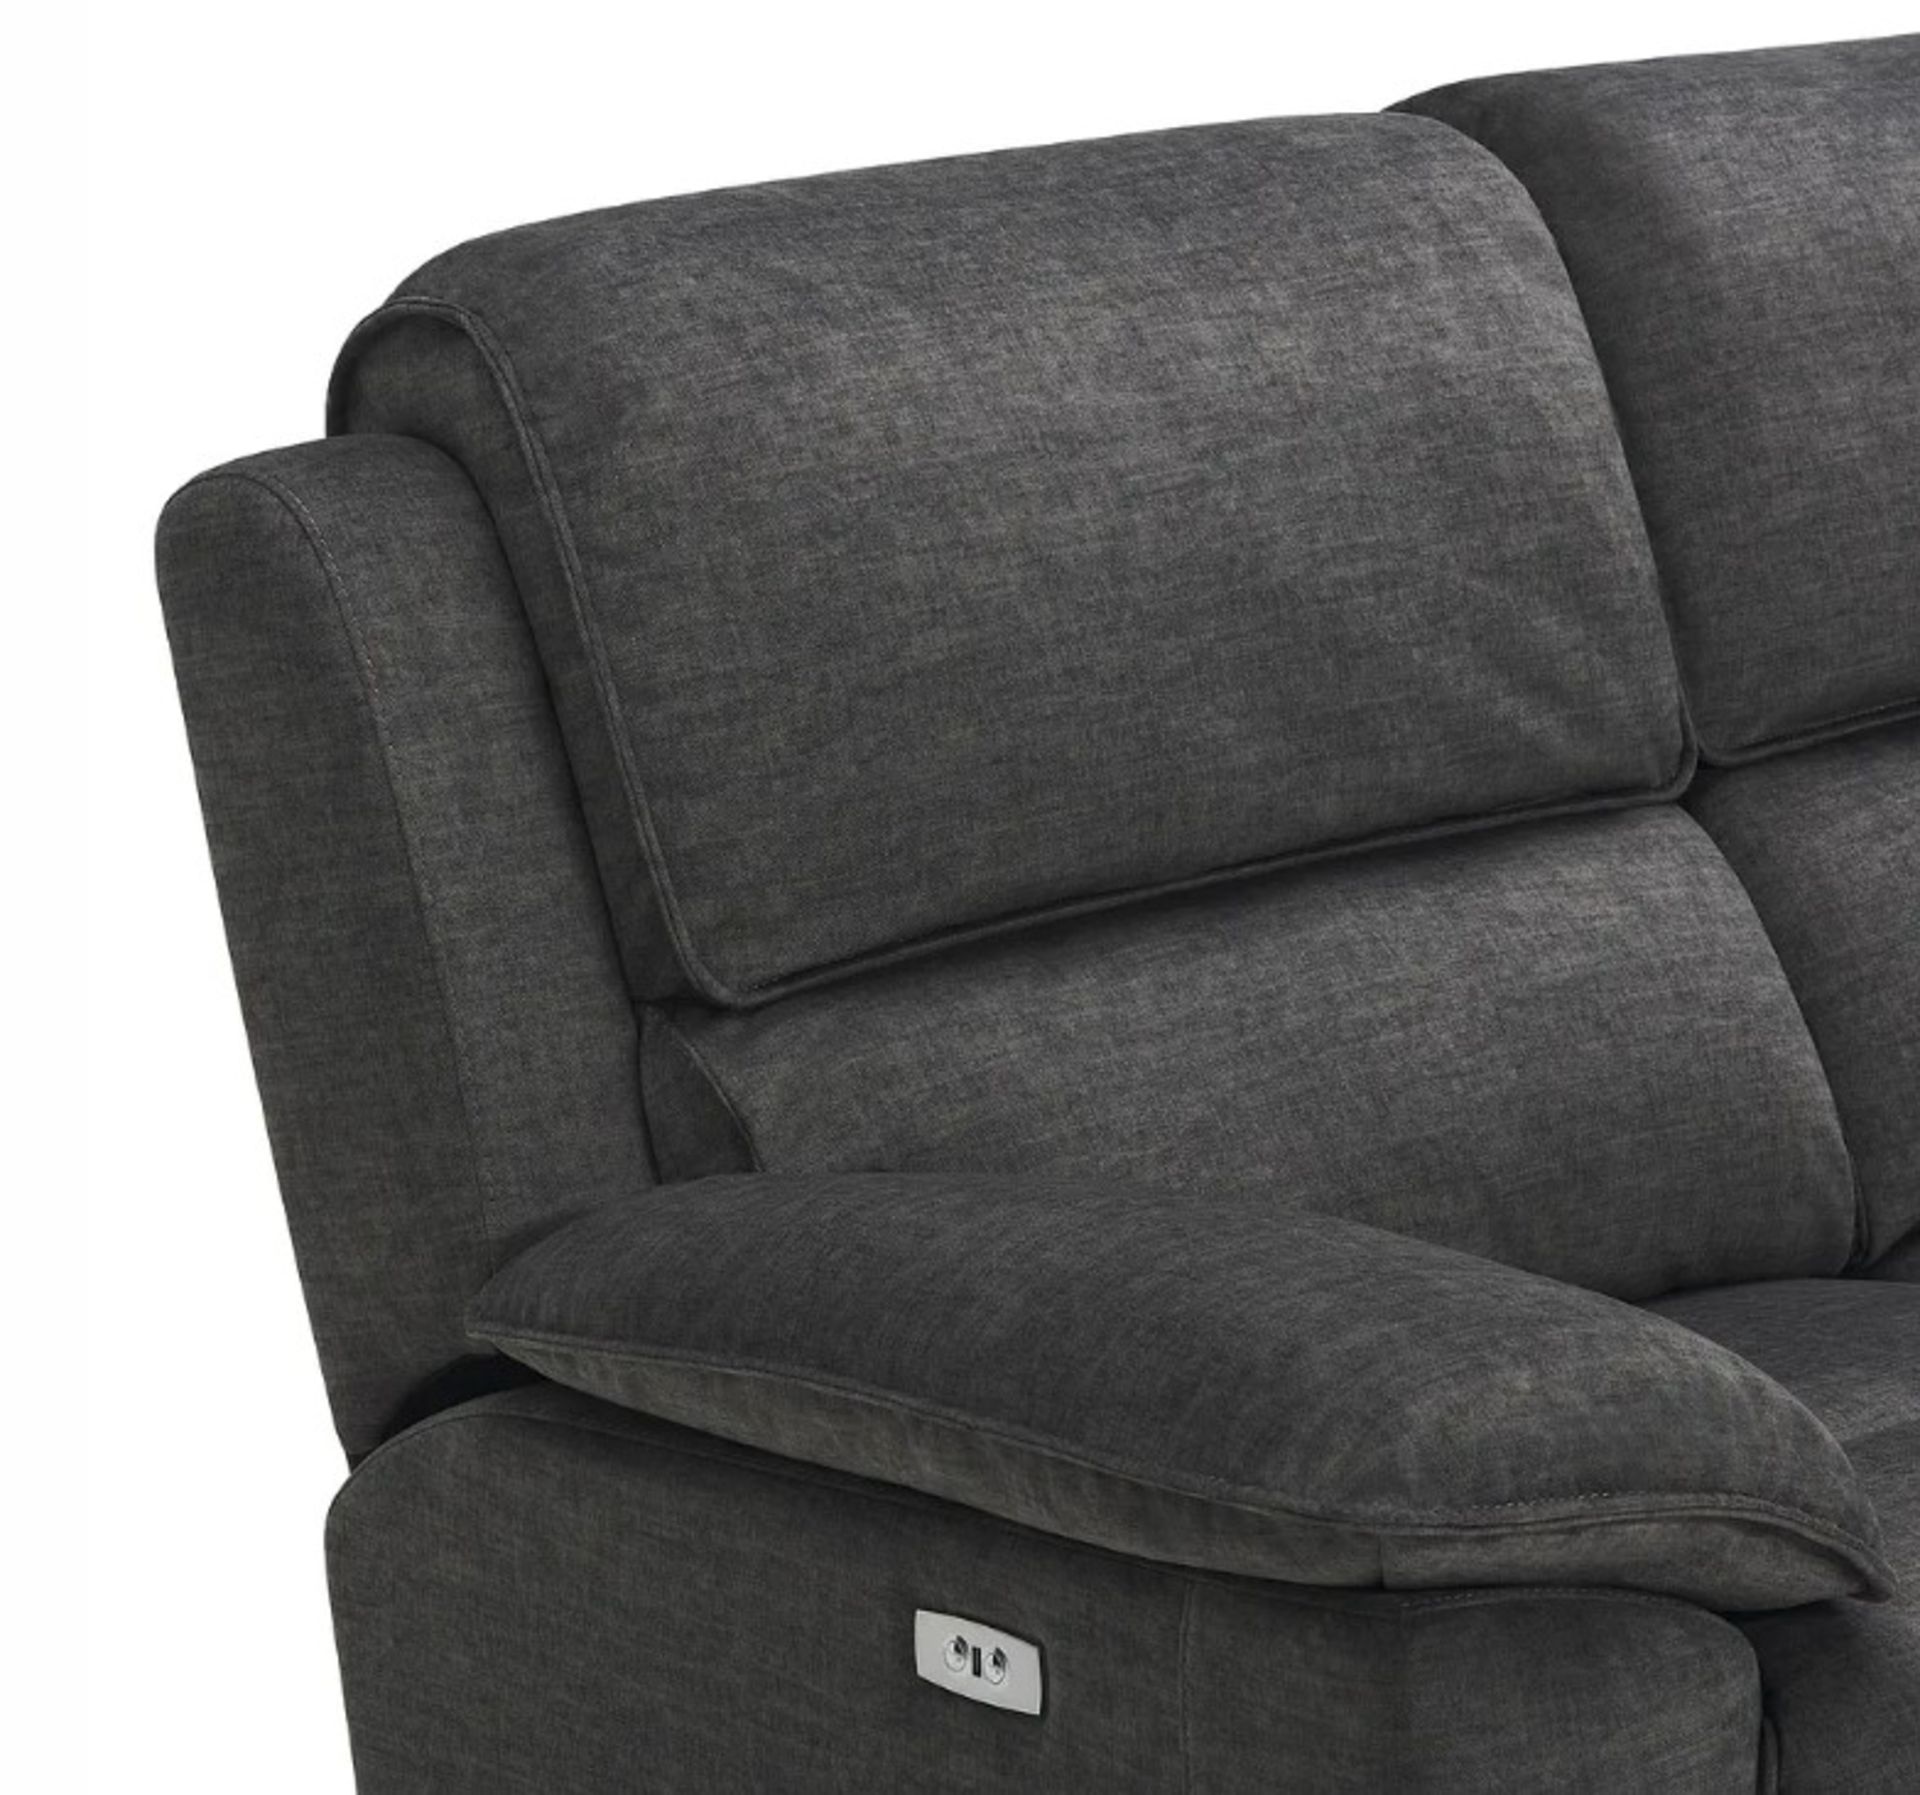 GOODWOOD 6 Seat Corner Recliner Sofa | Plush Charcoal Fabric. RRP £2,549. (ROW7-6BOXES) The Goodwood - Image 8 of 9